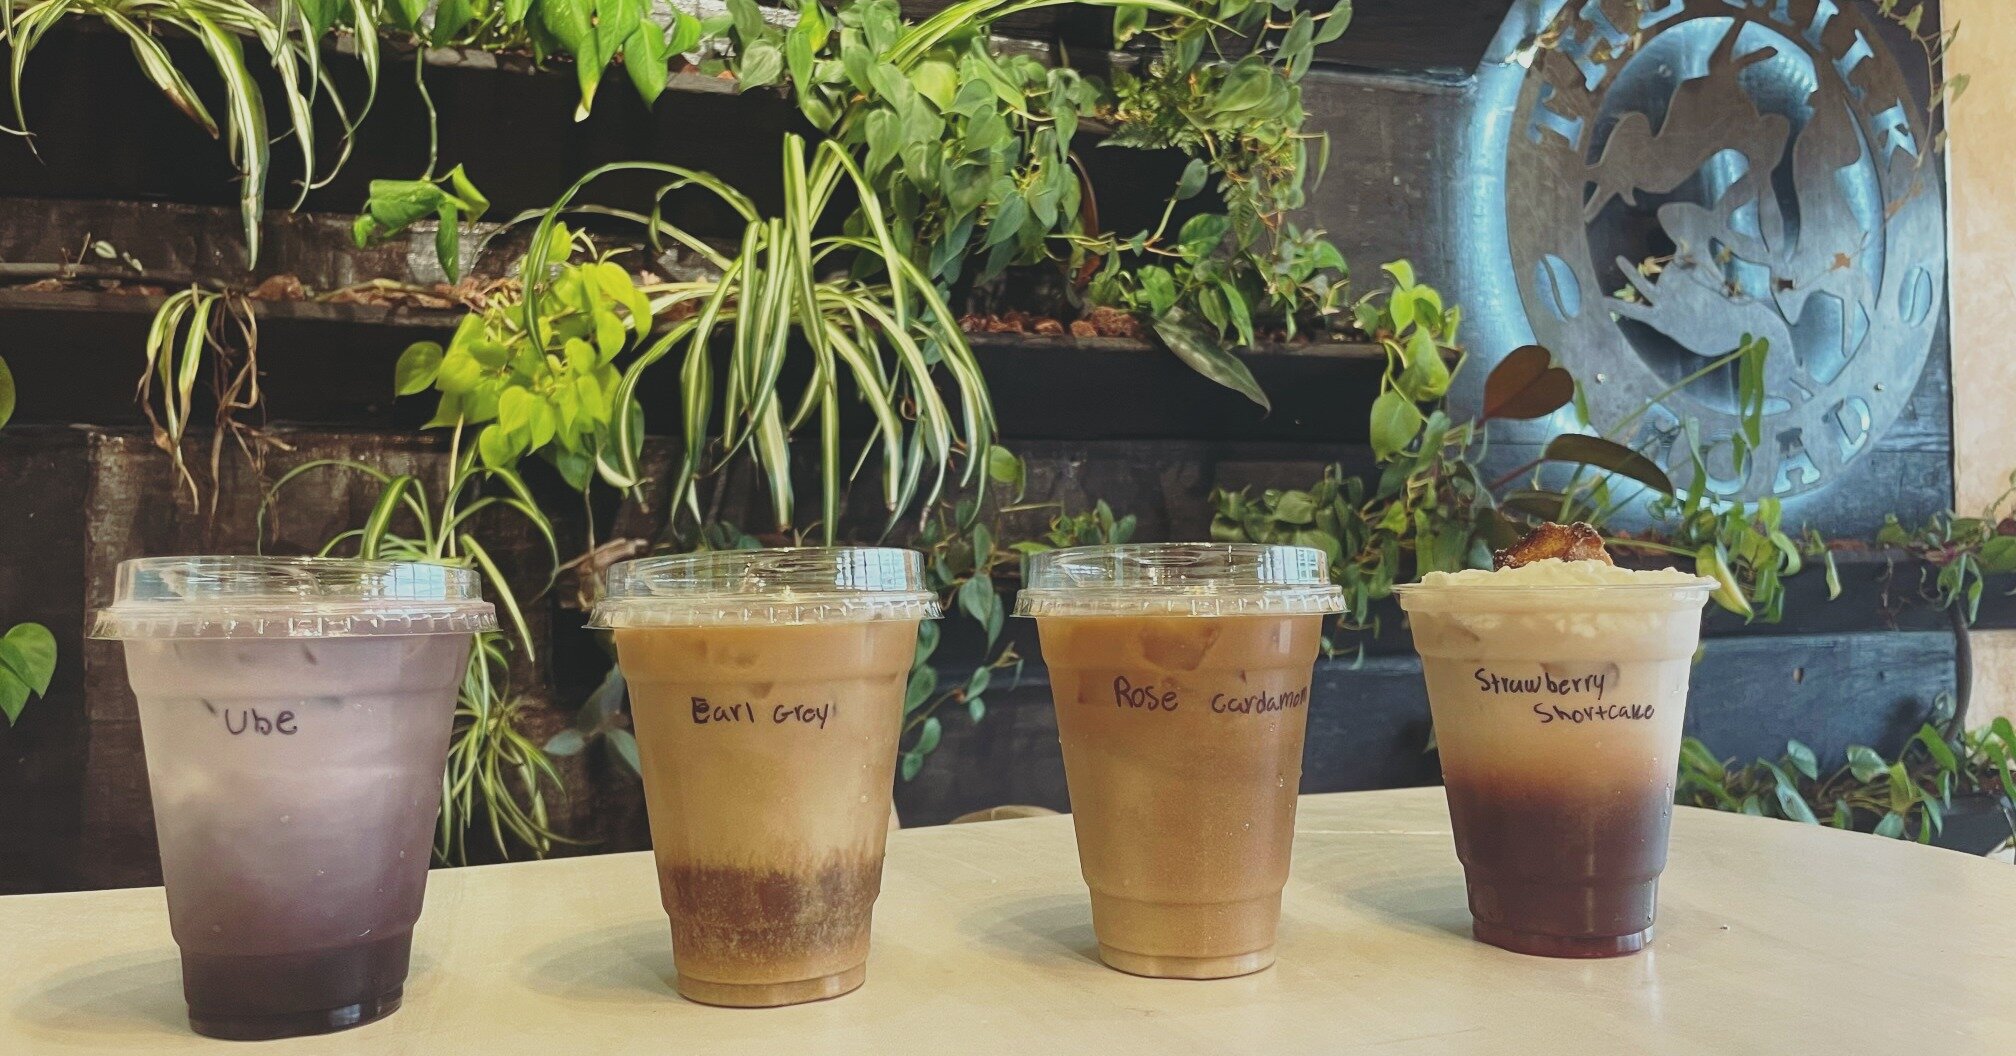 Try out one of our new 🍓 spring 🍓 drink specials-Ube, Early Grey, Rose Cardamom, or Strawberry Shortcake! Indecisive? Let your barista know and we will  help you find your new favorite! 

&middot;

&middot;

&middot;

#springflavors #springtime #co